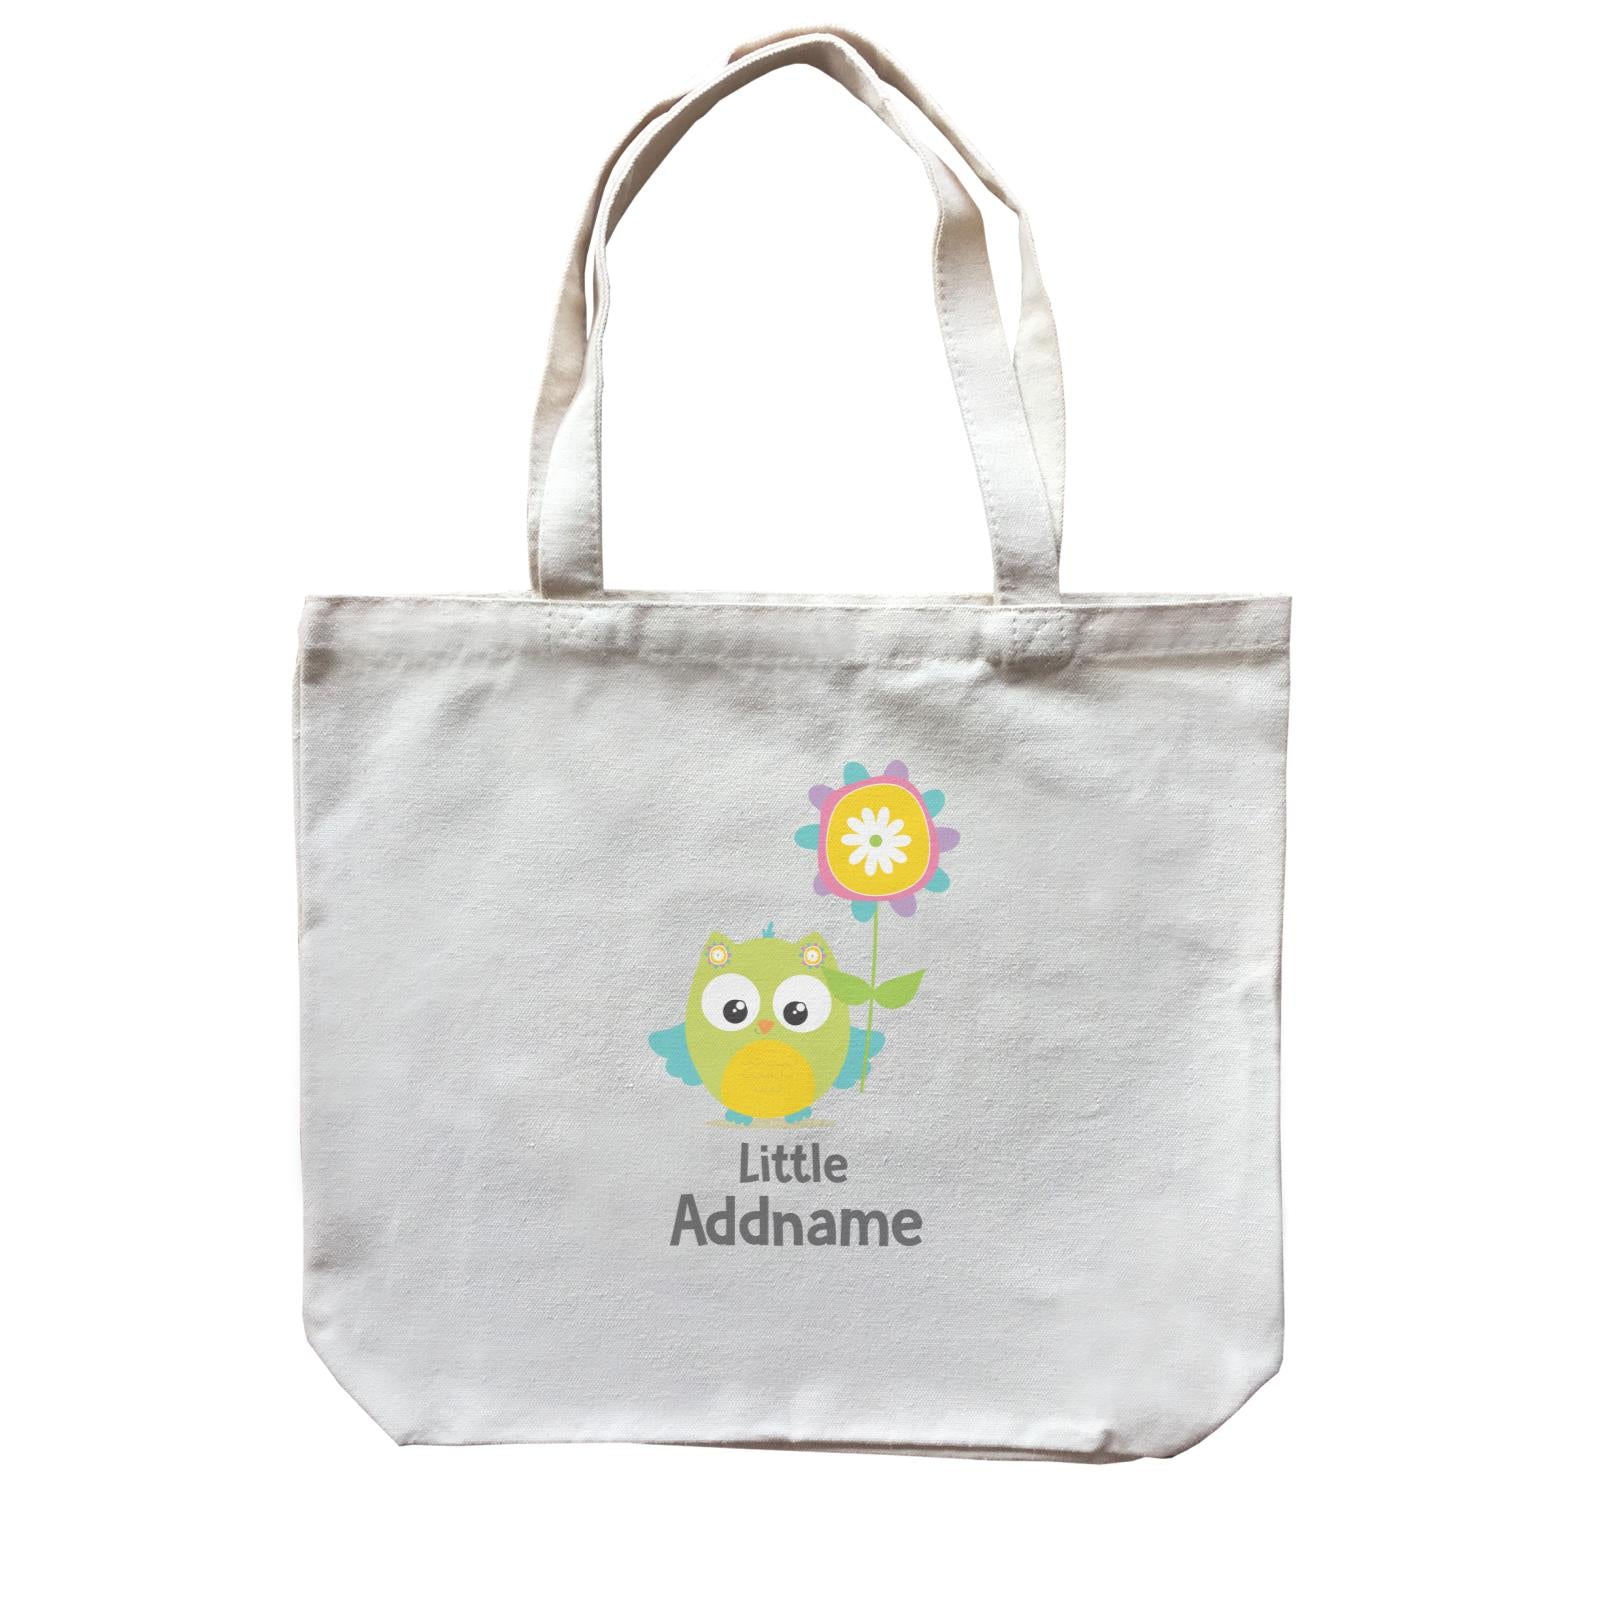 Cute Owls Green with Flower Little Addname Canvas Bag